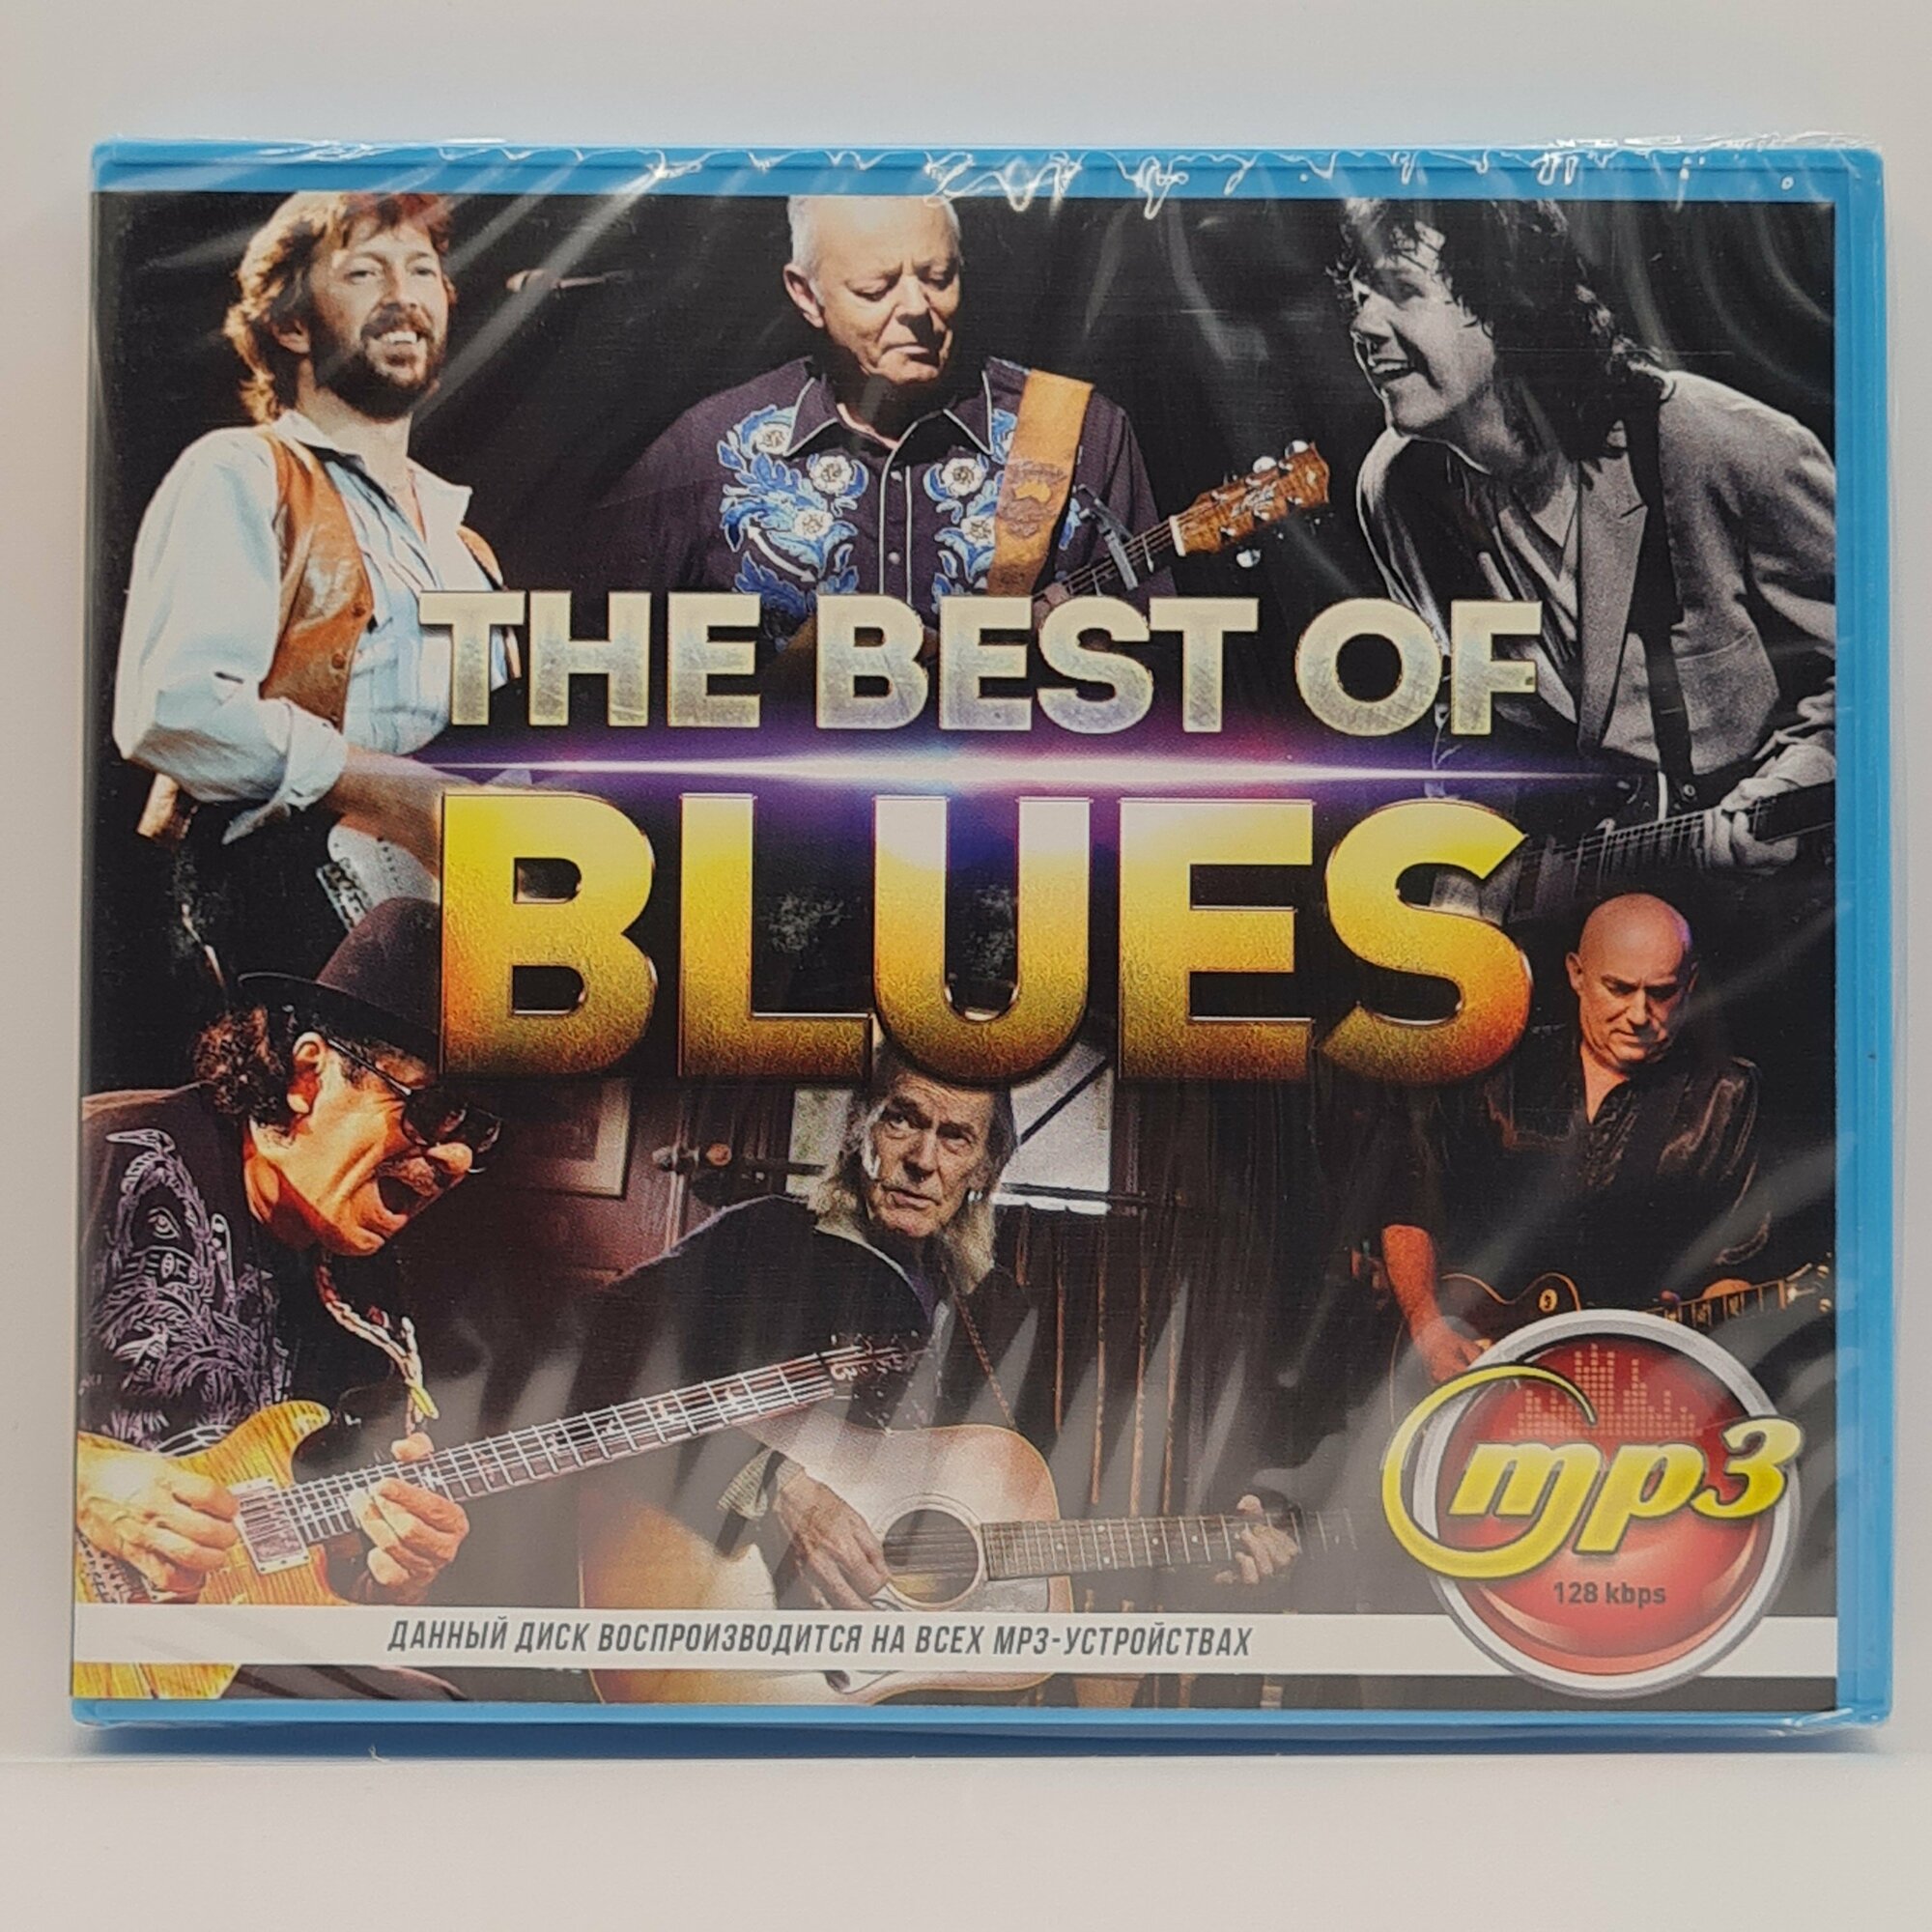 The Best Of BLUES (MP3)